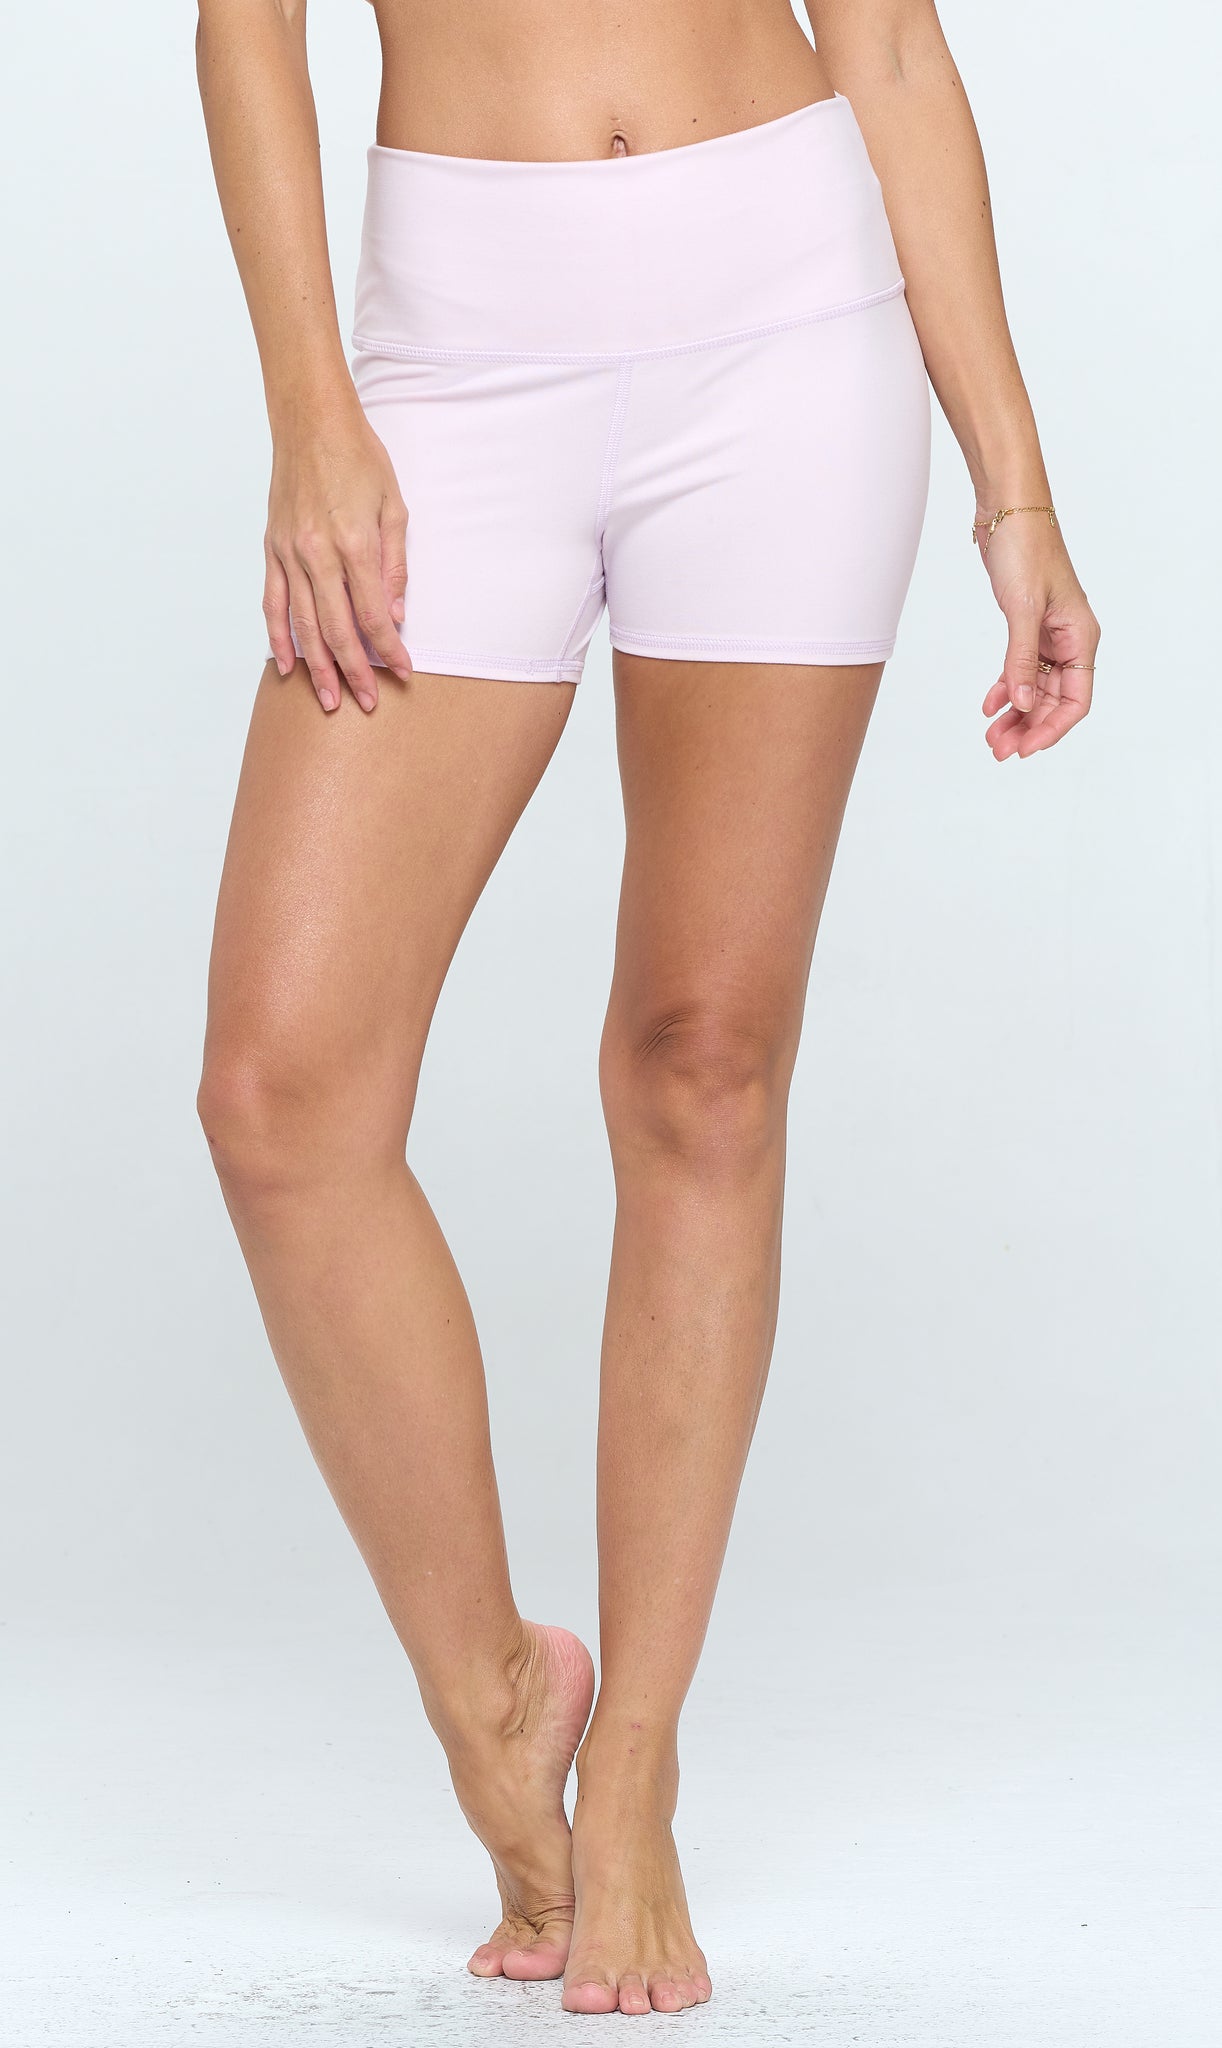 Emma - Orchid Ice - Booty Shorts 3" (High-Waist)